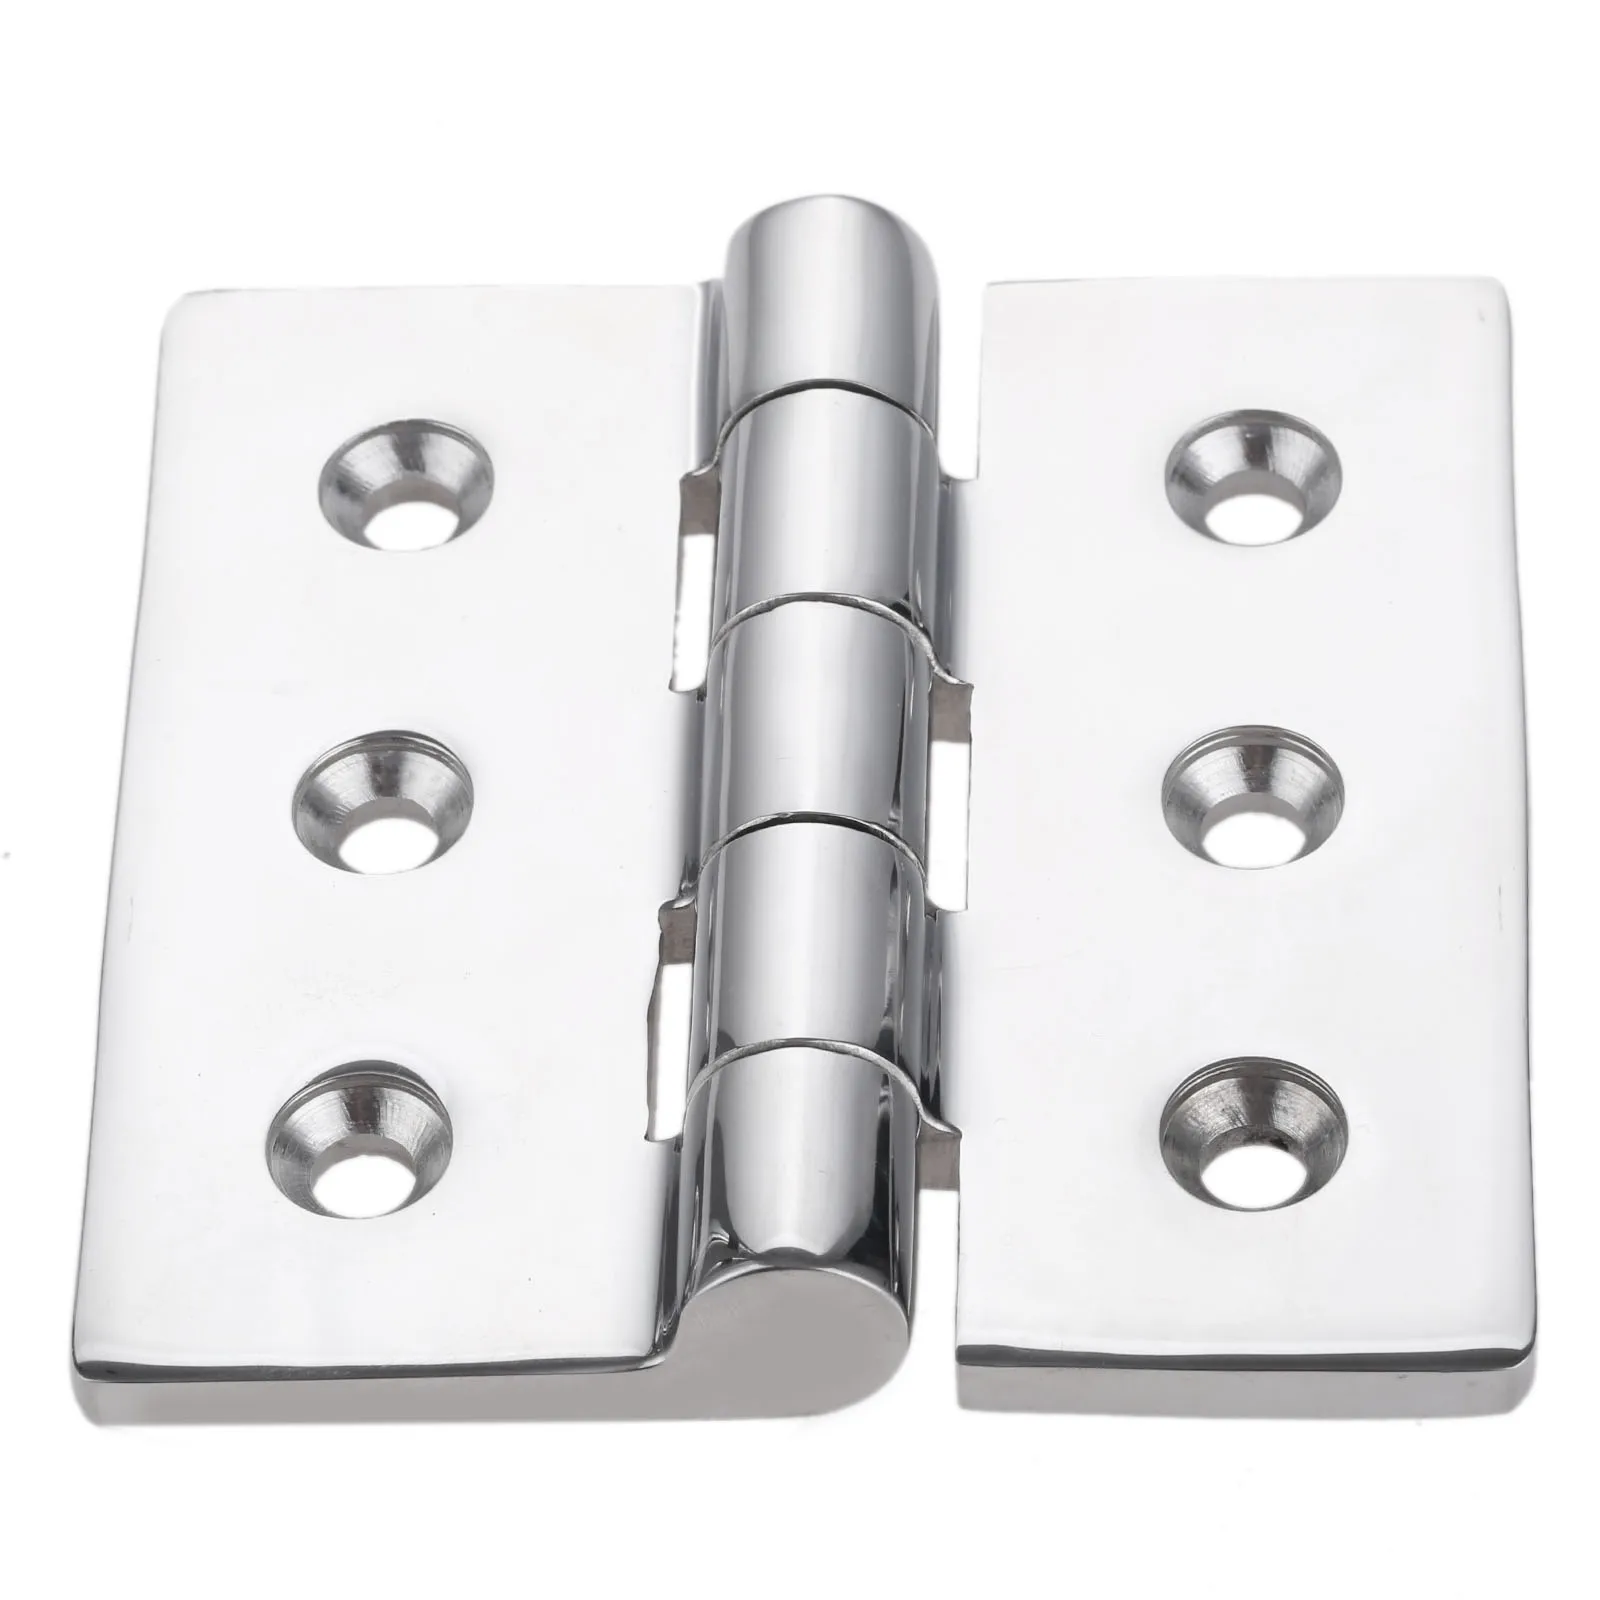 

1Pc Marine 304 Stainless Steel Heavy Duty Square Hinge For RV Yachts Boats Fitting Hardware 100*100*6.3mm M6 Screw